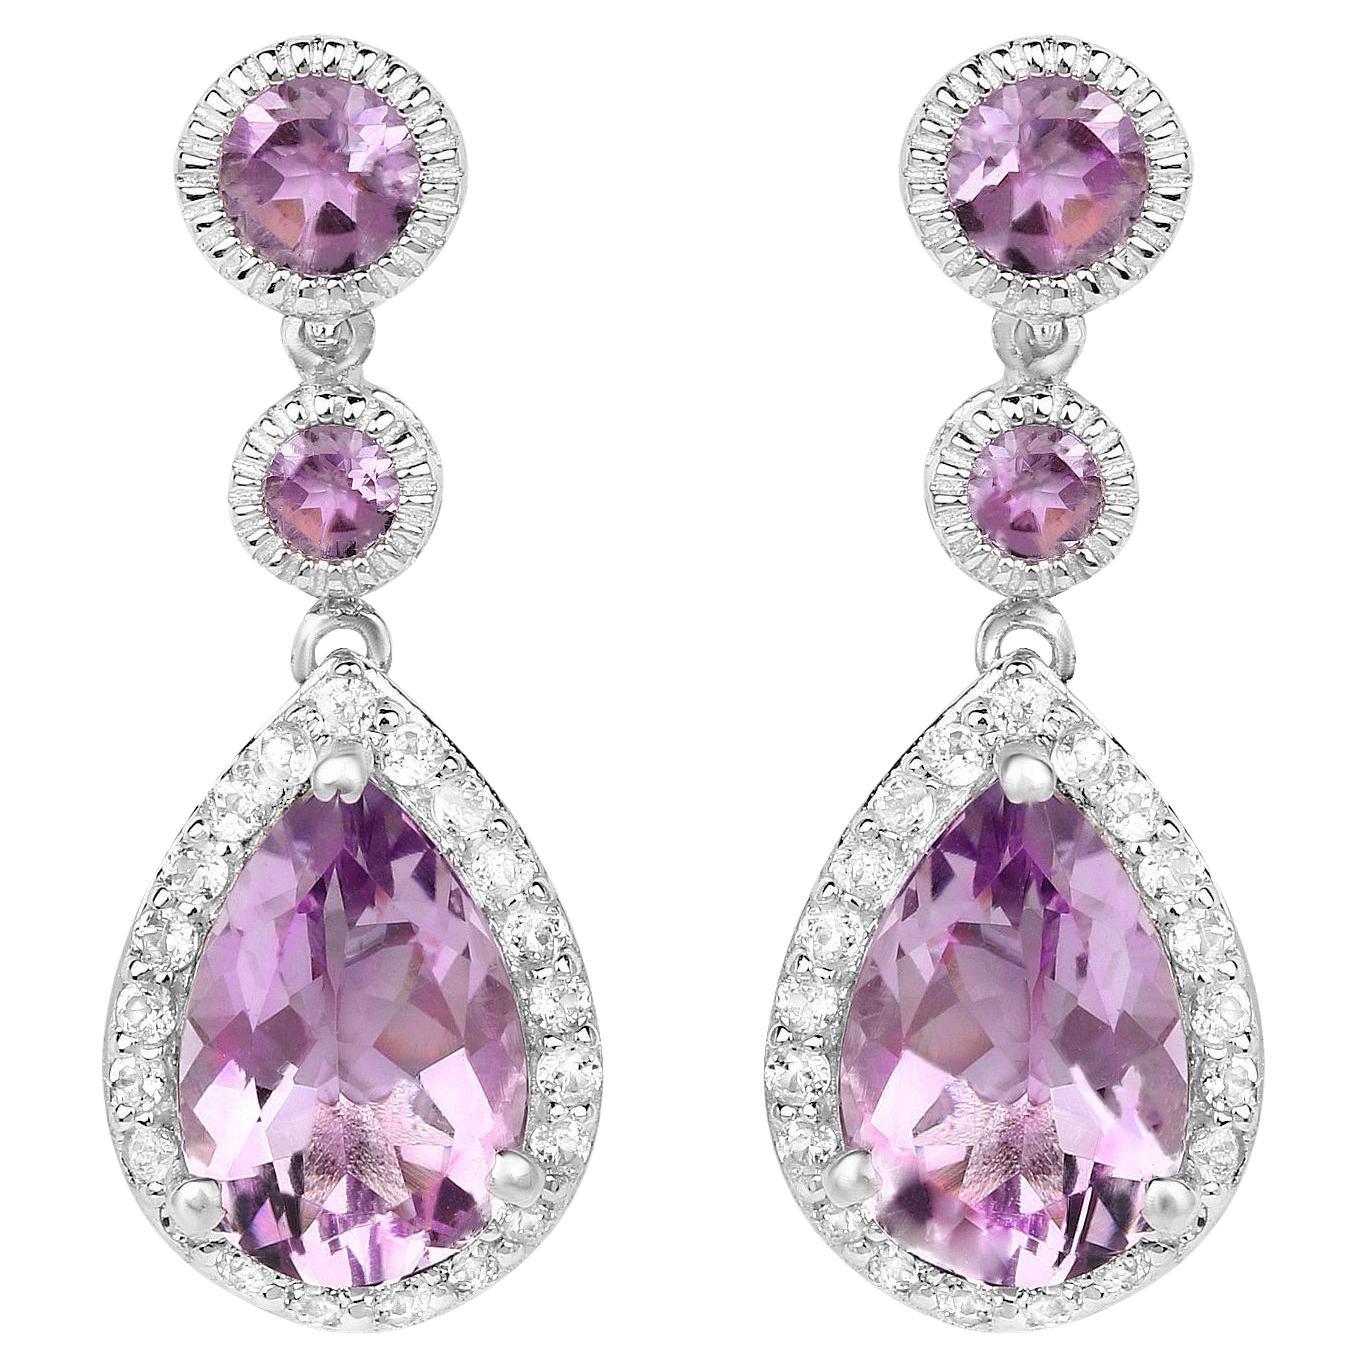 Amethyst Earrings With White Topazes 7.16 Carats Rhodium Plated Sterling Silver